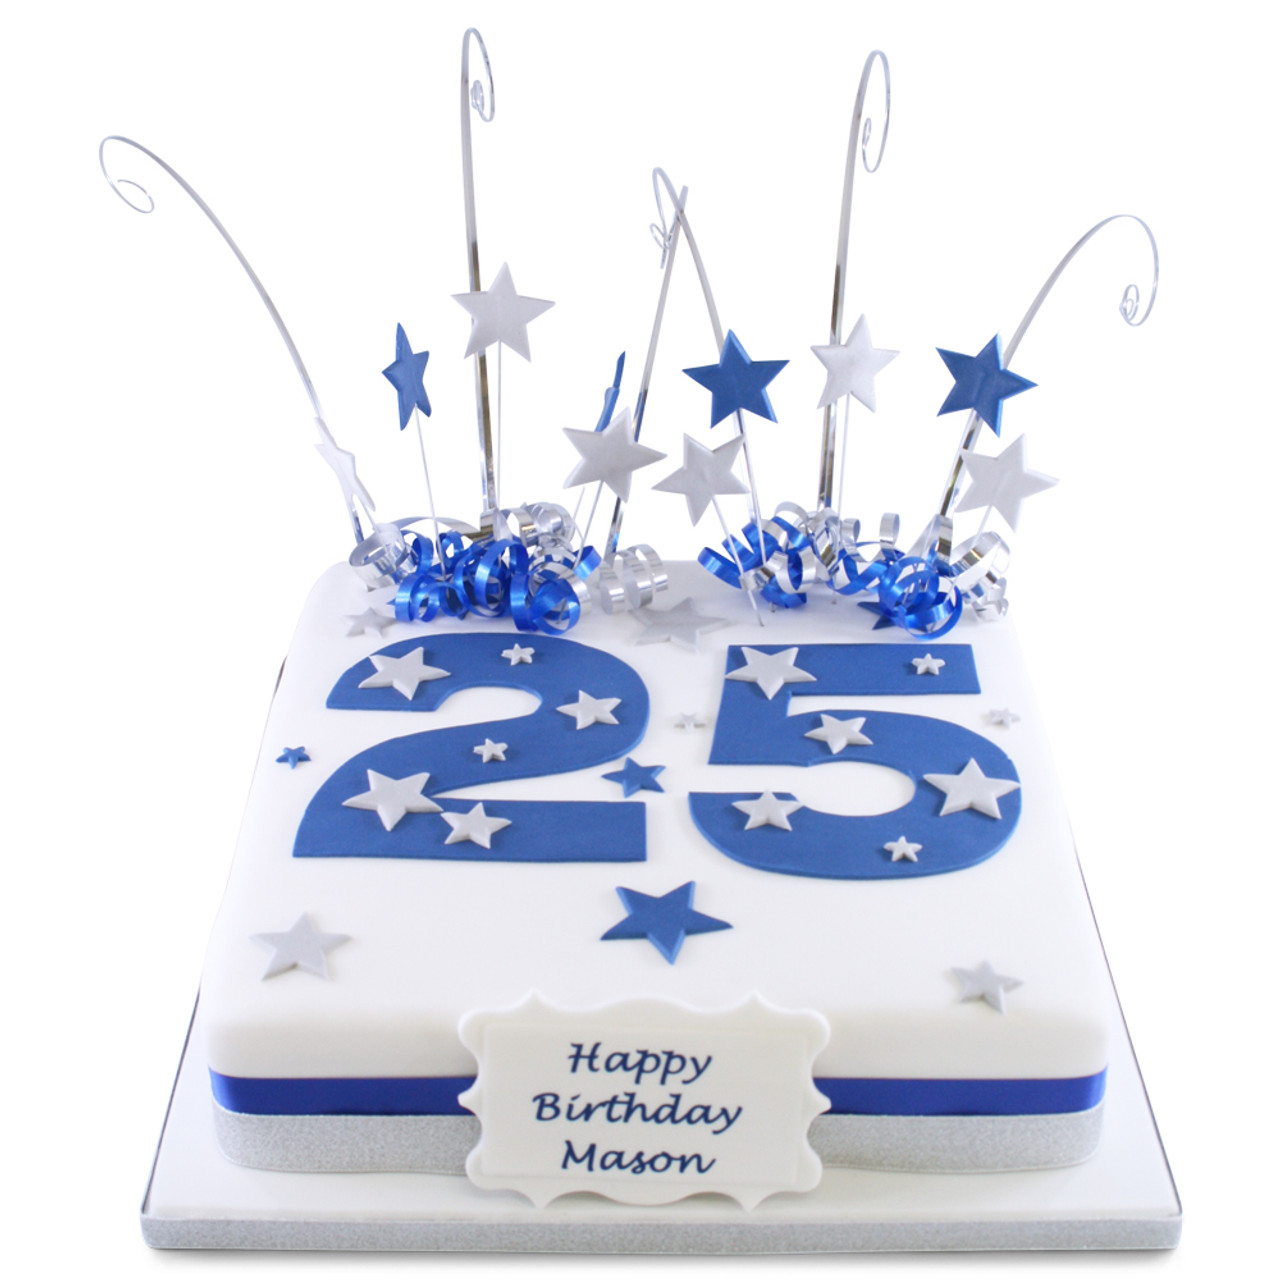 25th Anniversary Wooden Cake Topper – PGFactory.ie